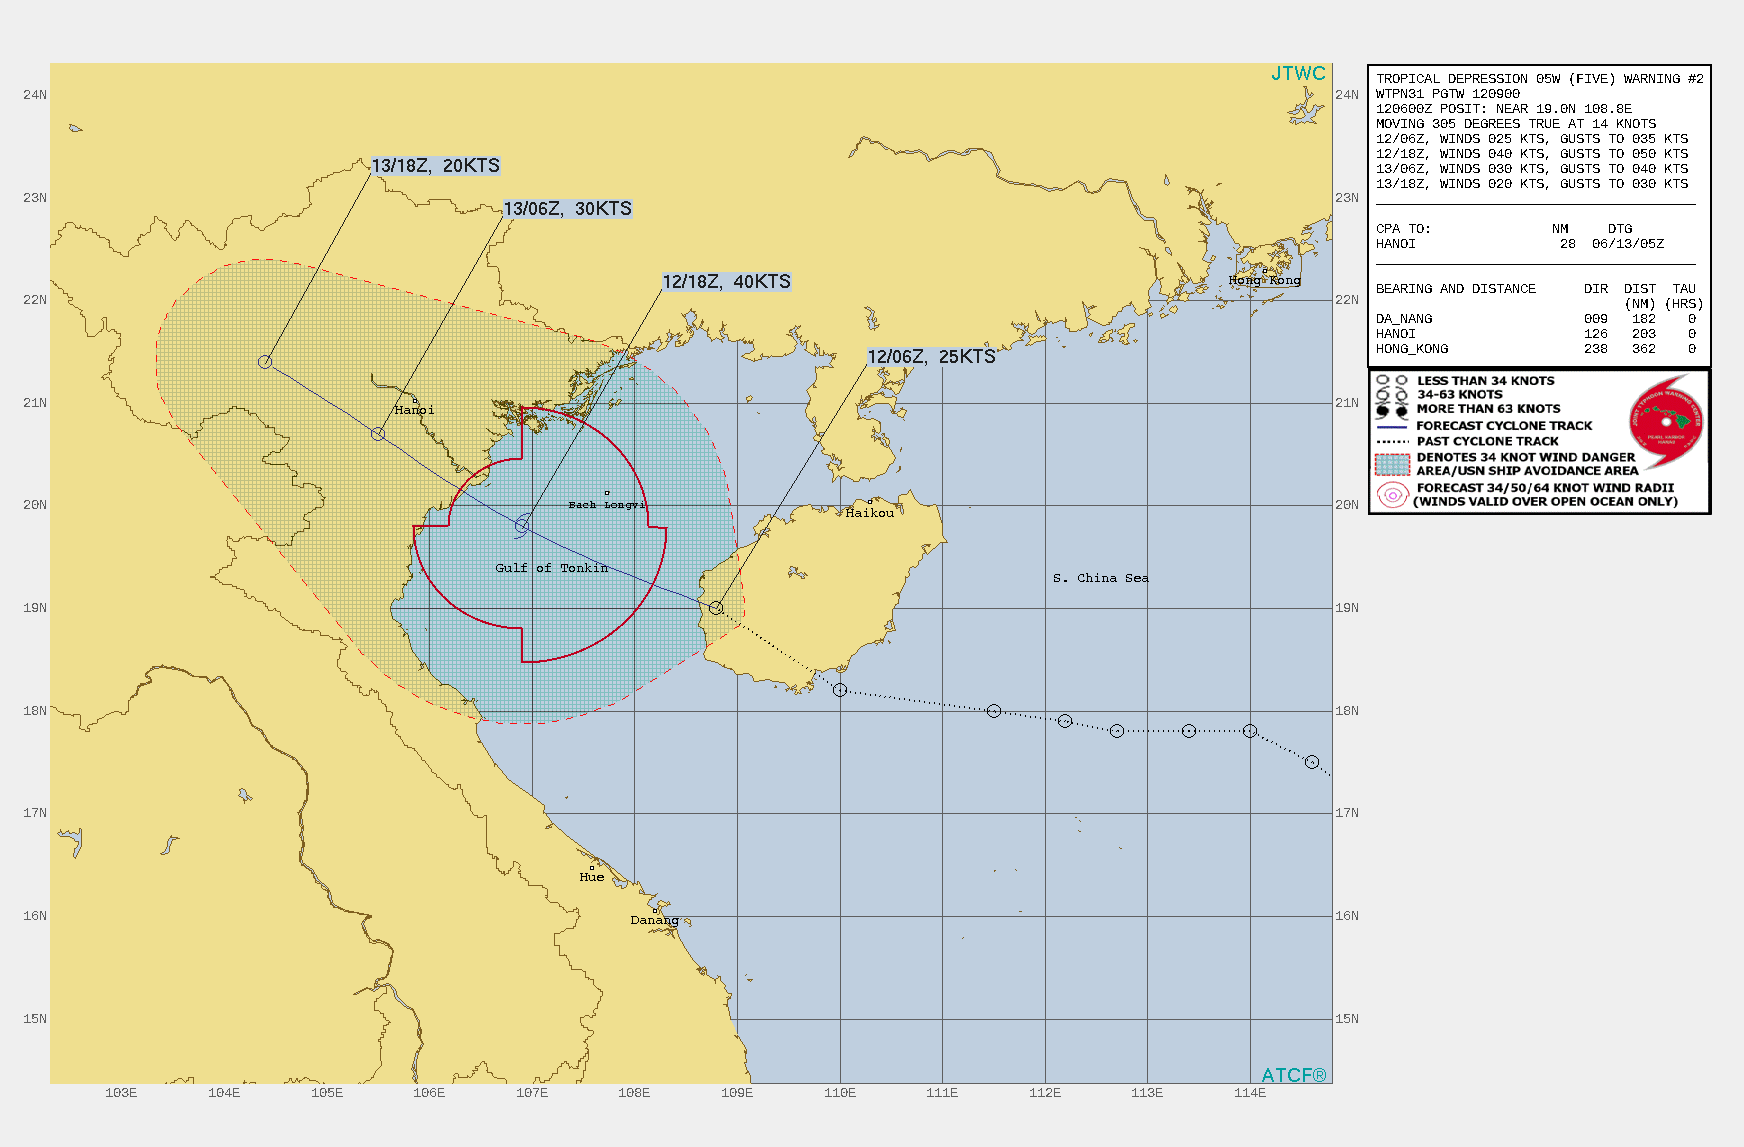 TD 05W. WARNING 2 ISSUED AT 12/09UTC.THE INITIAL POSITION IS PLACED WITH FAIR CONFIDENCE BASED ON THE LOW LEVEL CIRCULATION FEATURE IN THE MULTISPECTRAL SAT IMAGERY ANIMATION THAT  COINCIDED WITH A WEAK CIRCULATION FEATURE IN A RADAR LOOP FROM CMA. THE  INITIAL INTENSITY OF 25KNOTS IS EXTRAPOLATED FROM NEARBY OBSERVATIONS  INCLUDING A SHIP REPORT (23KNOTS/999MB) 140KM TO THE NORTHWEST AND  CONSISTENT WITH THE CONVECTIVE SIGNATURE. THE SYSTEM IS IN A MARGINAL  ENVIRONMENT WITH GOOD WESTWARD AND EQUATORWARD OUTFLOW OFFSET BY MODERATE  (15-20KTS) VERTICAL WIND SHEAR (VWS). THE SYSTEM IS TRACKING ALONG THE  SOUTHWESTERN PERIPHERY OF THE SUBTROPICAL RIDGE (STR) TO THE EAST- NORTHEAST.TD 05W WILL CONTINUE ON ITS CURRENT TRACK UNDER THE SUBTROPICAL RIGDE, CROSS THE  GULF OF TONKIN, MAKE LANDFALL OVER NORTHERN VIETNAM AROUND 18H, THEN  TRACK INLAND. THE ROBUST OUTFLOW AND THE WARM SEA SURFACE TEMPS IN THE GULF WILL OFFSET  THE VWS AND FUEL INTENSIFICATION TO A PEAK OF 45KNOTS BY 12H. AFTERWARD,  LAND INTERACTION WITH THE RUGGED TERRAIN WILL RESULT IN A RAPID DECAY  LEADING TO DISSIPATION BY 36H AFTER IT PASSES JUST SOUTH OF HANOI.